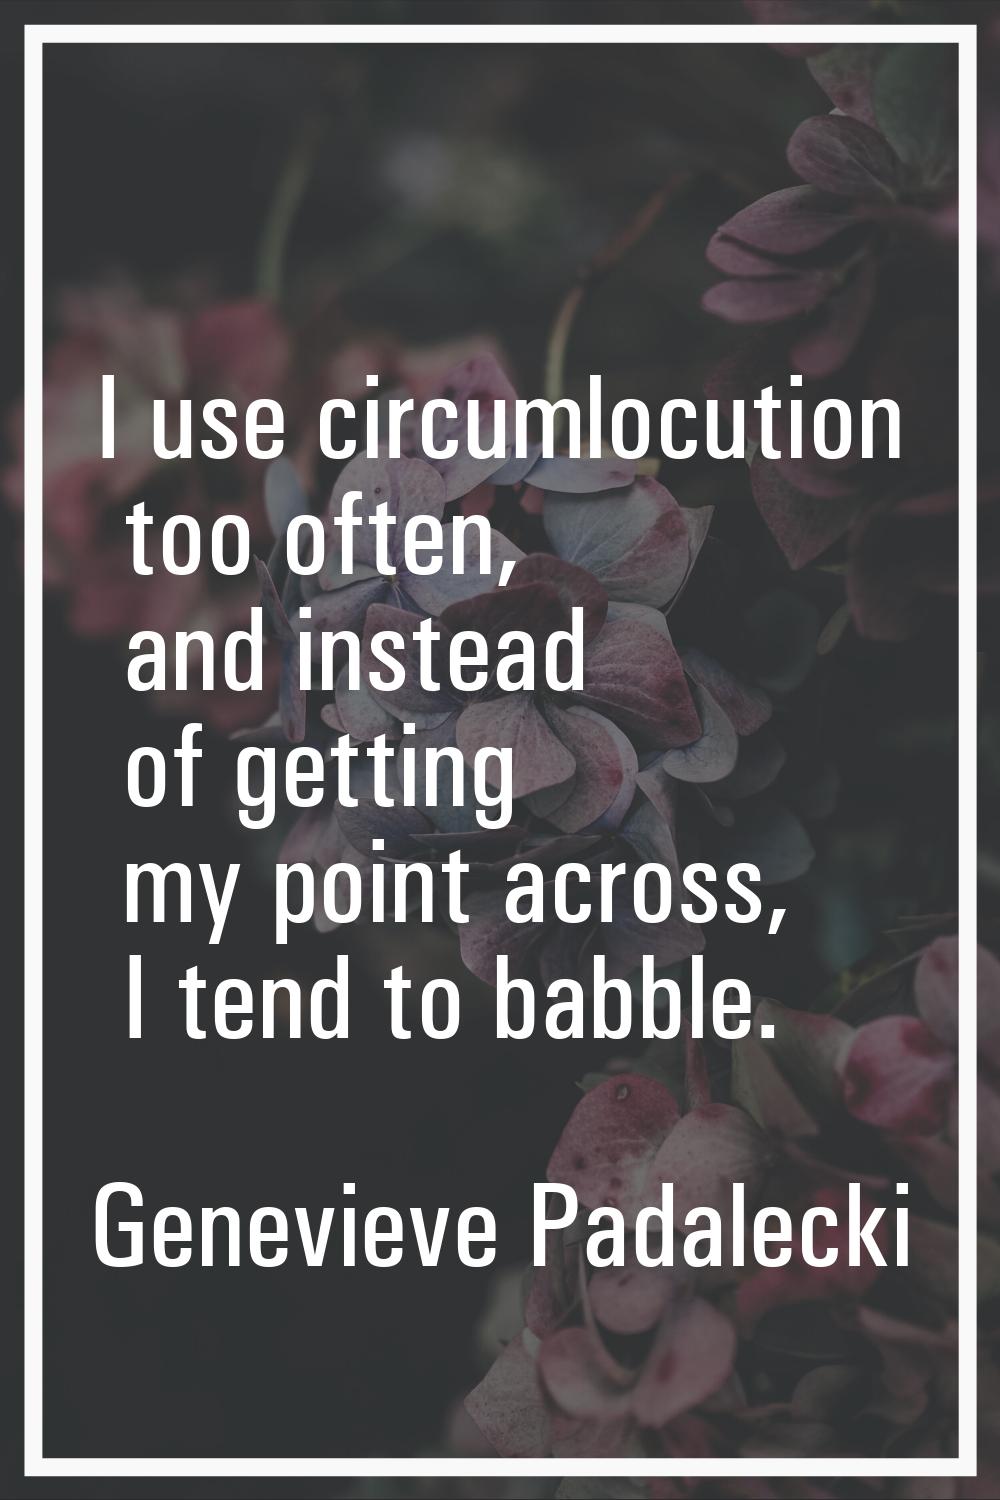 I use circumlocution too often, and instead of getting my point across, I tend to babble.